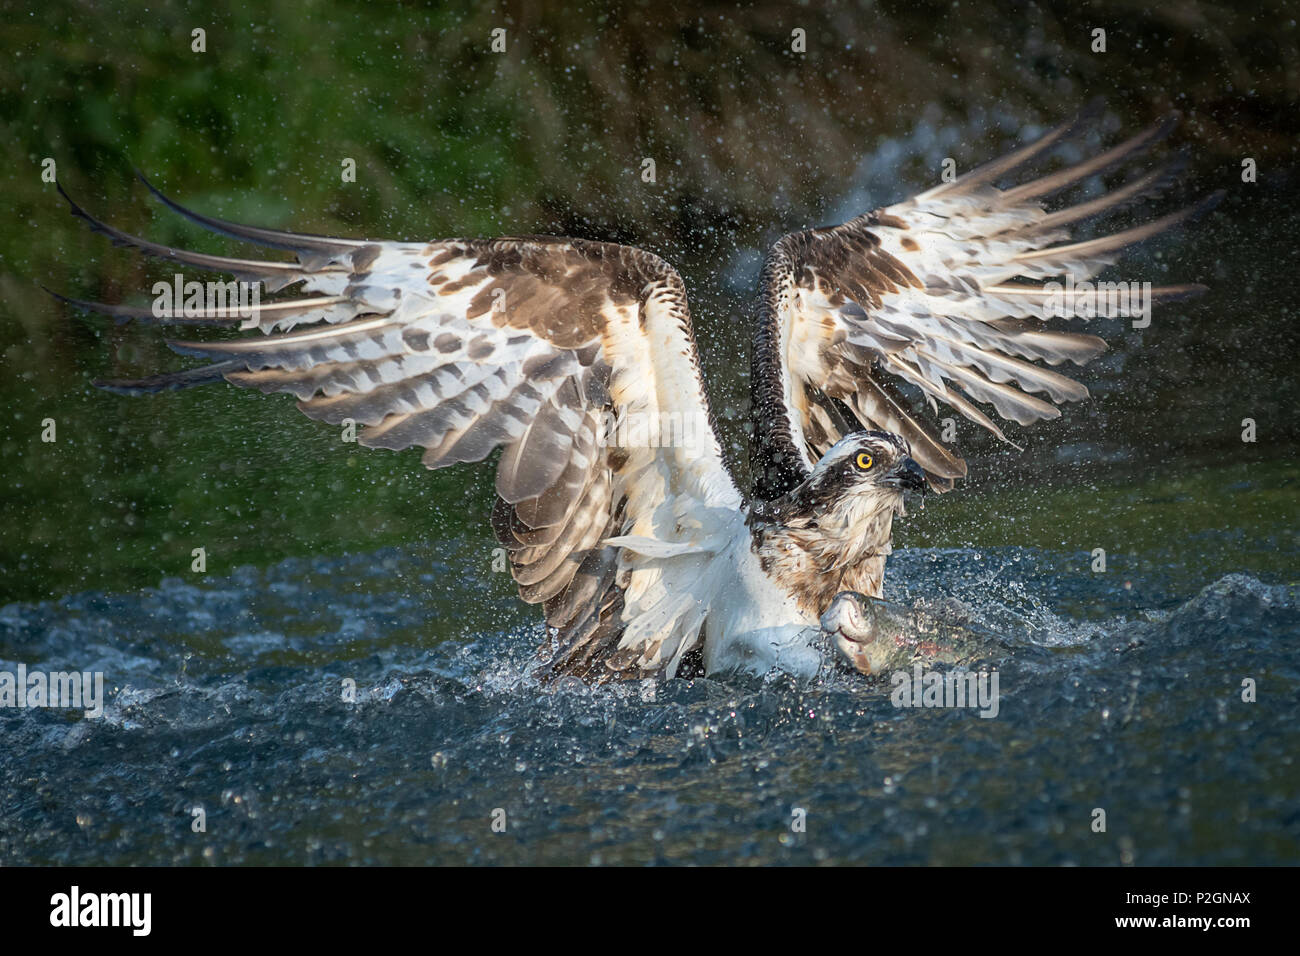 A close up photograph of an osprey fishing and emerging from the water with a trout and its wings outspread Stock Photo